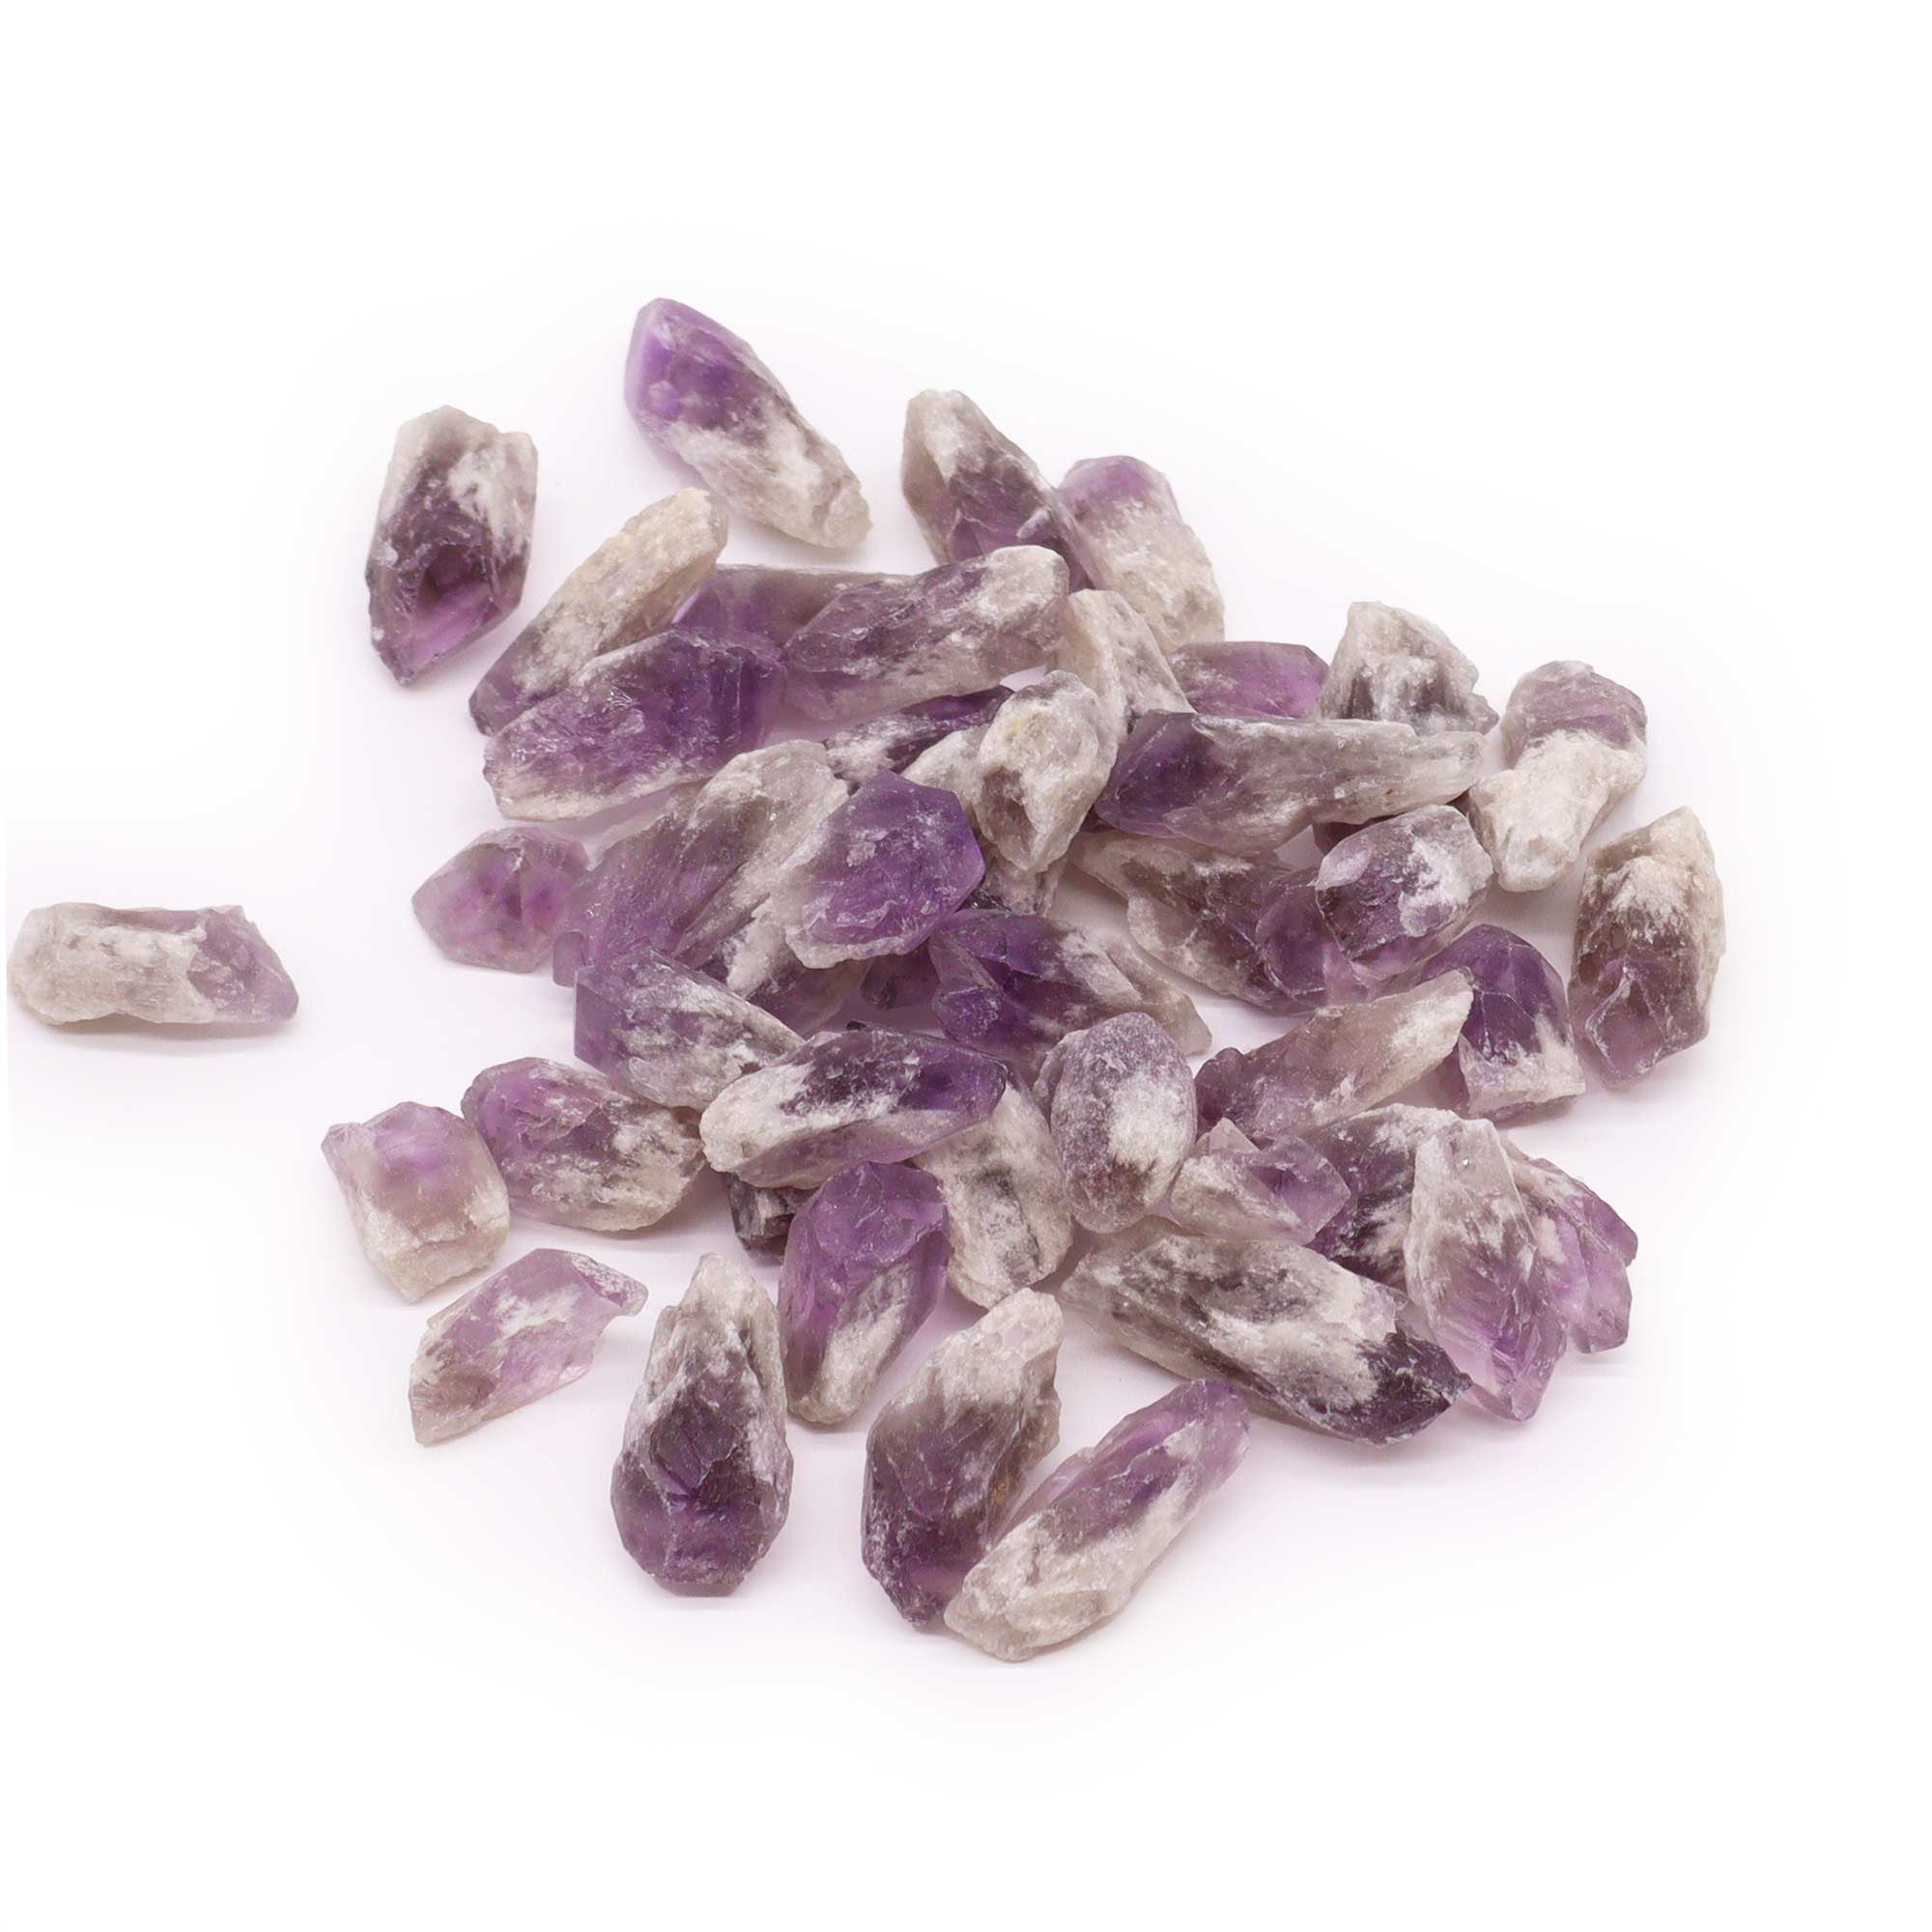 View Raw Crystals 500gm Amethyst Rough Points information